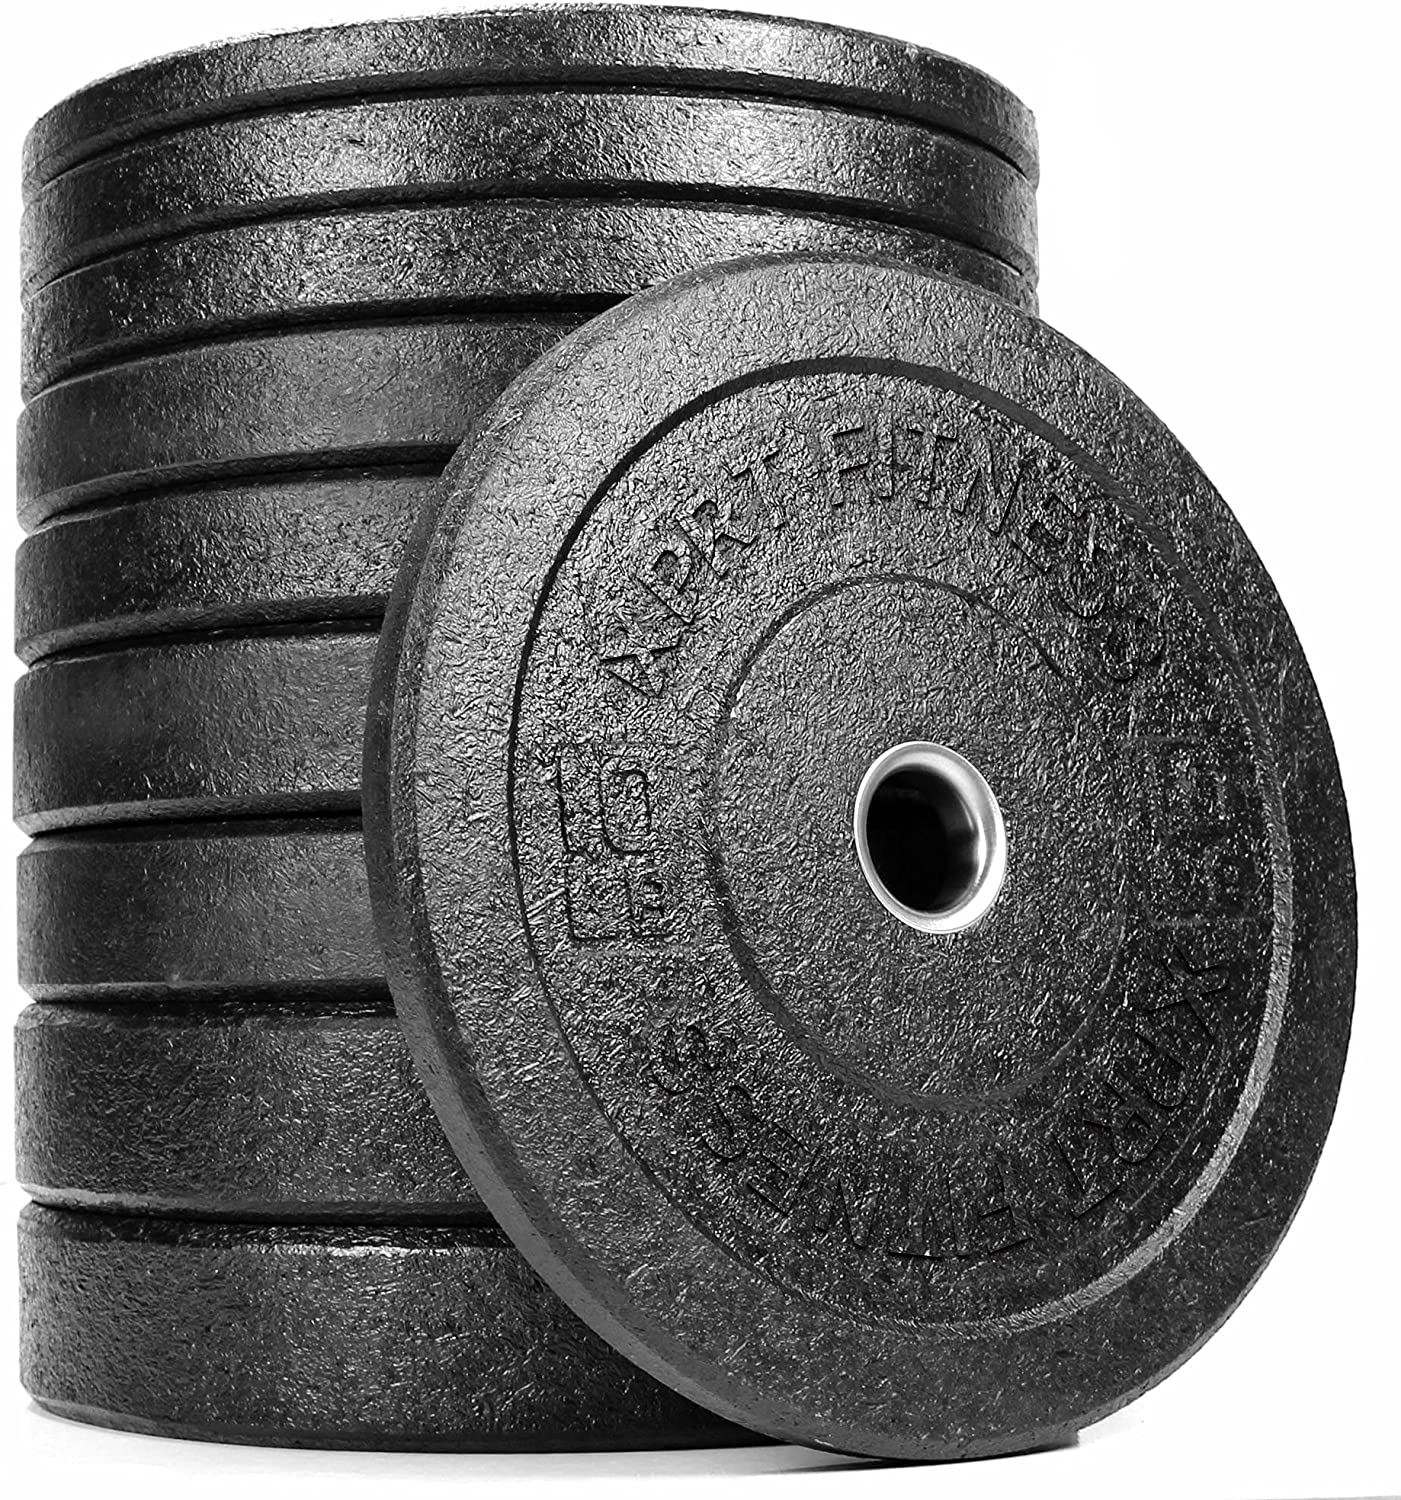 Barbell Olympic Grip Weight Plate for Strength Training-Trainnox